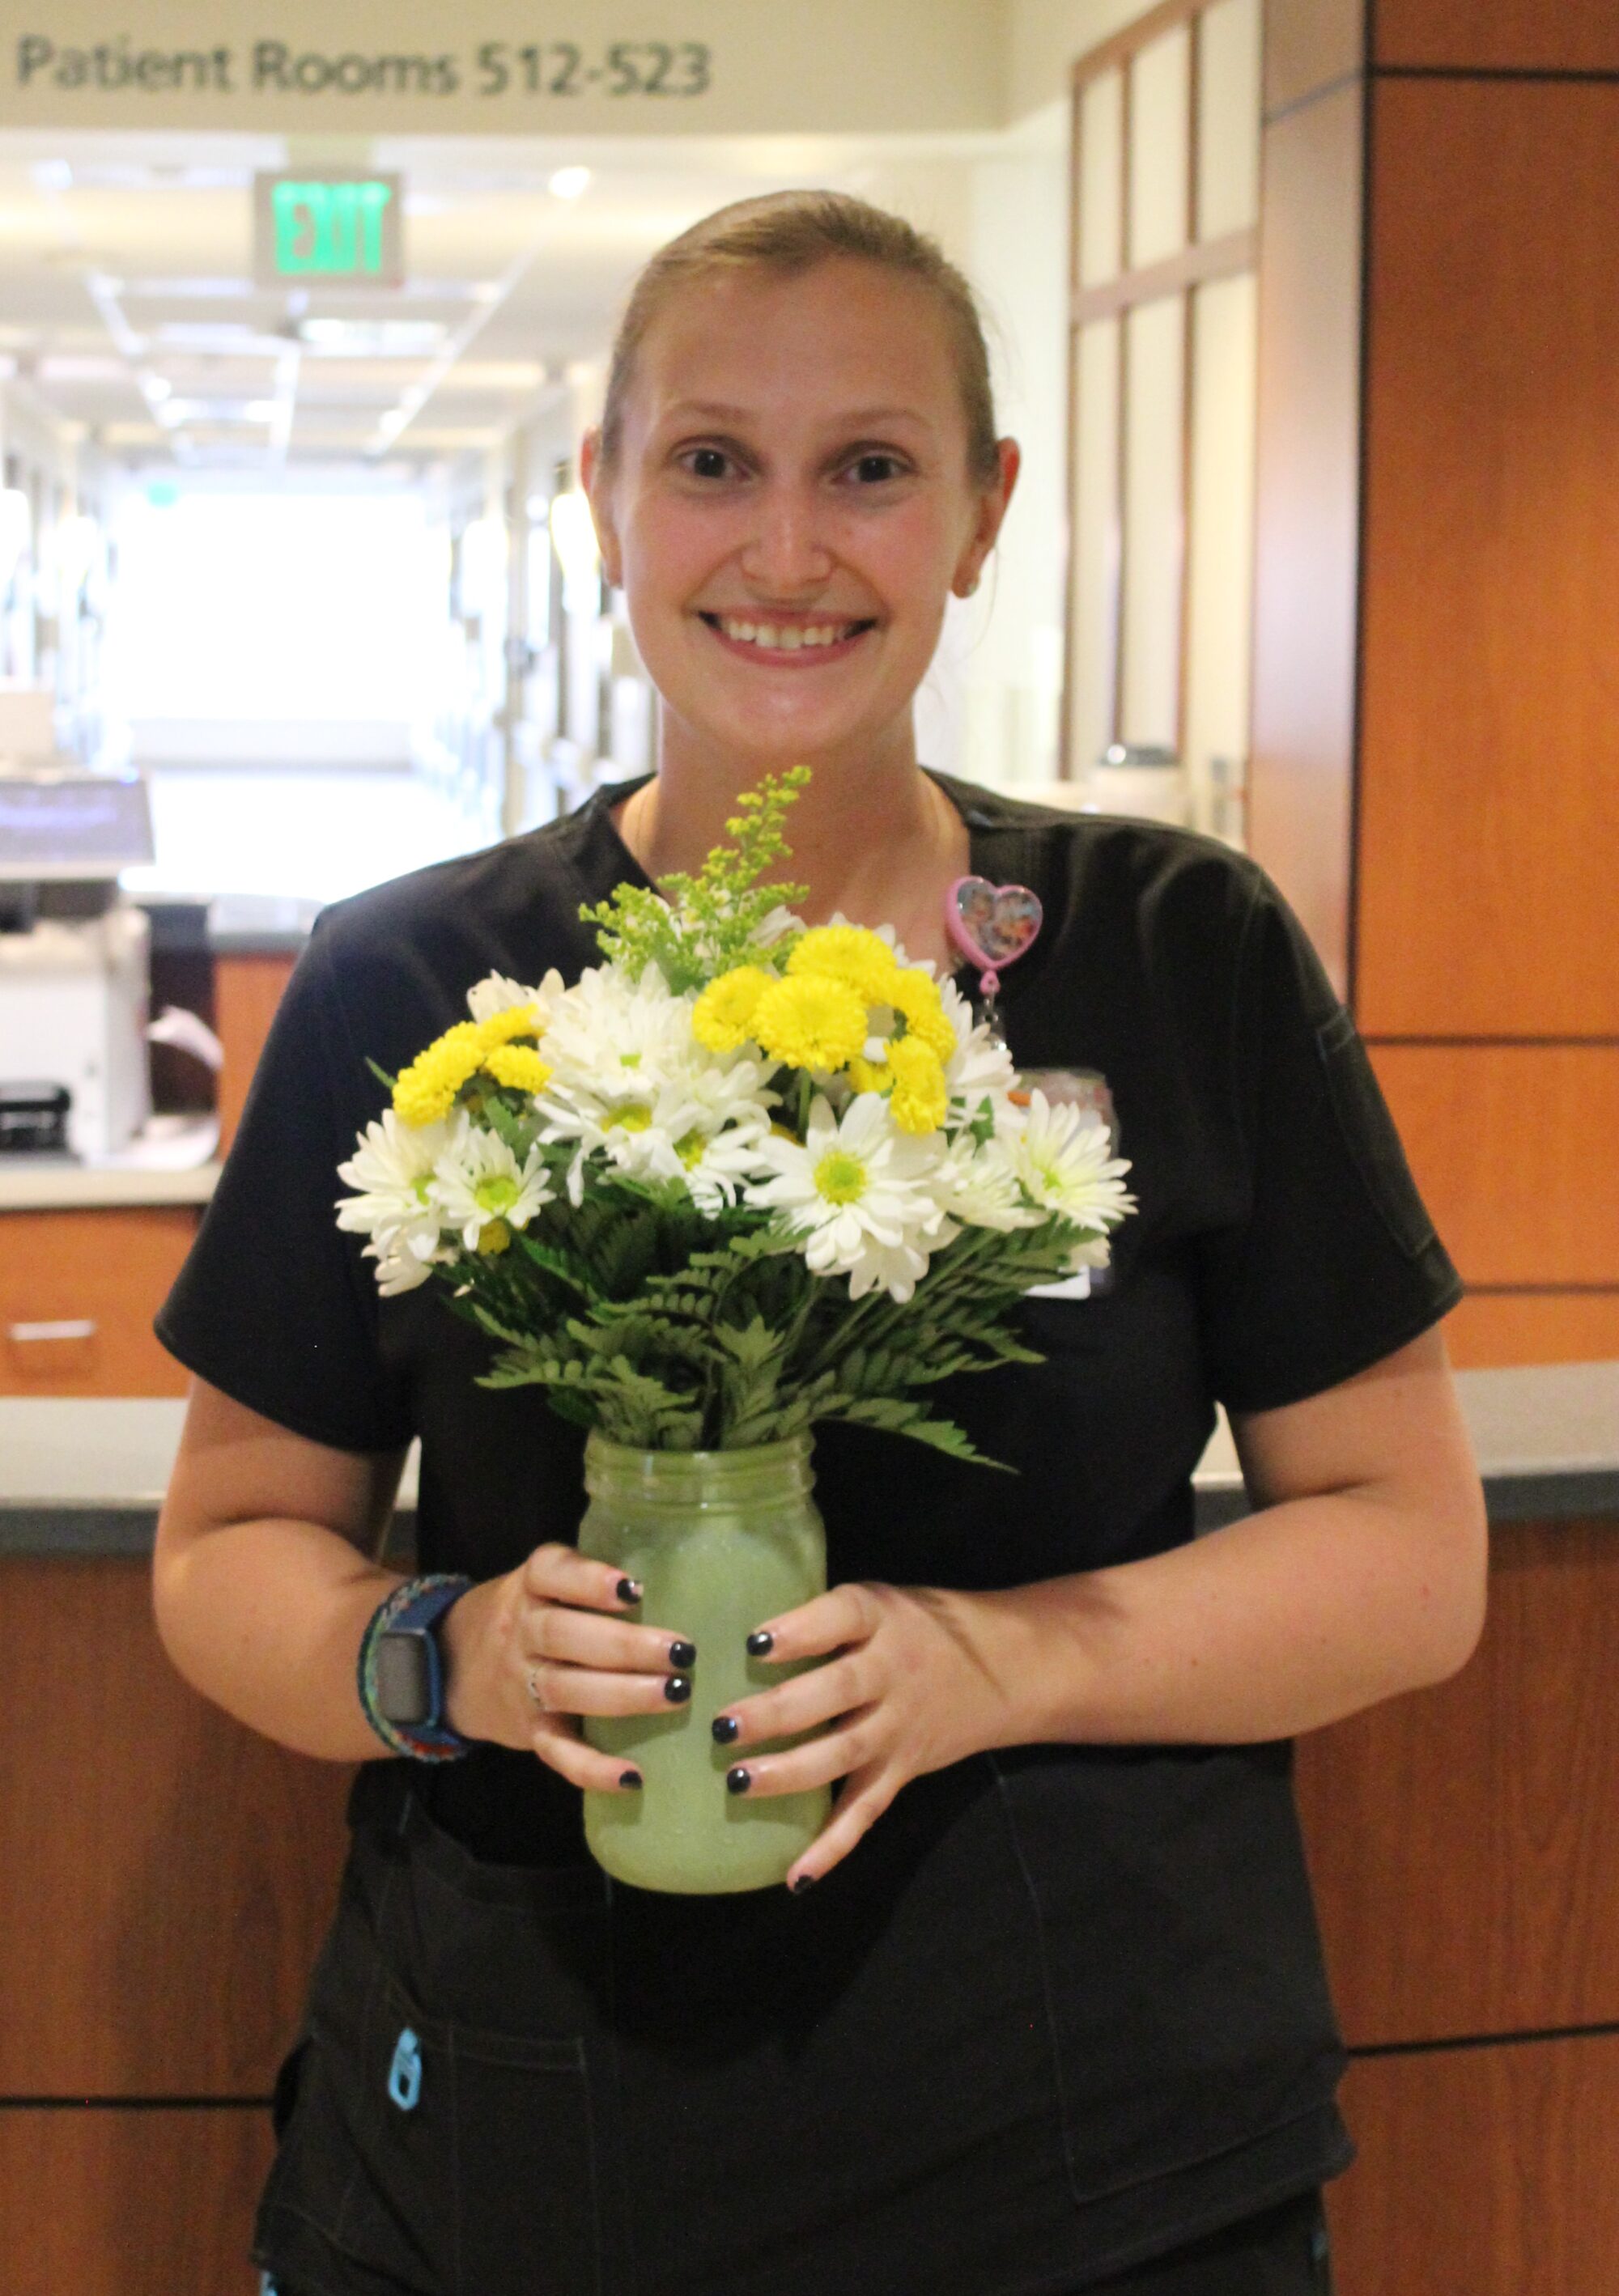 Anne wearing black scrubs and holding arrangement of yellow and white daisies.